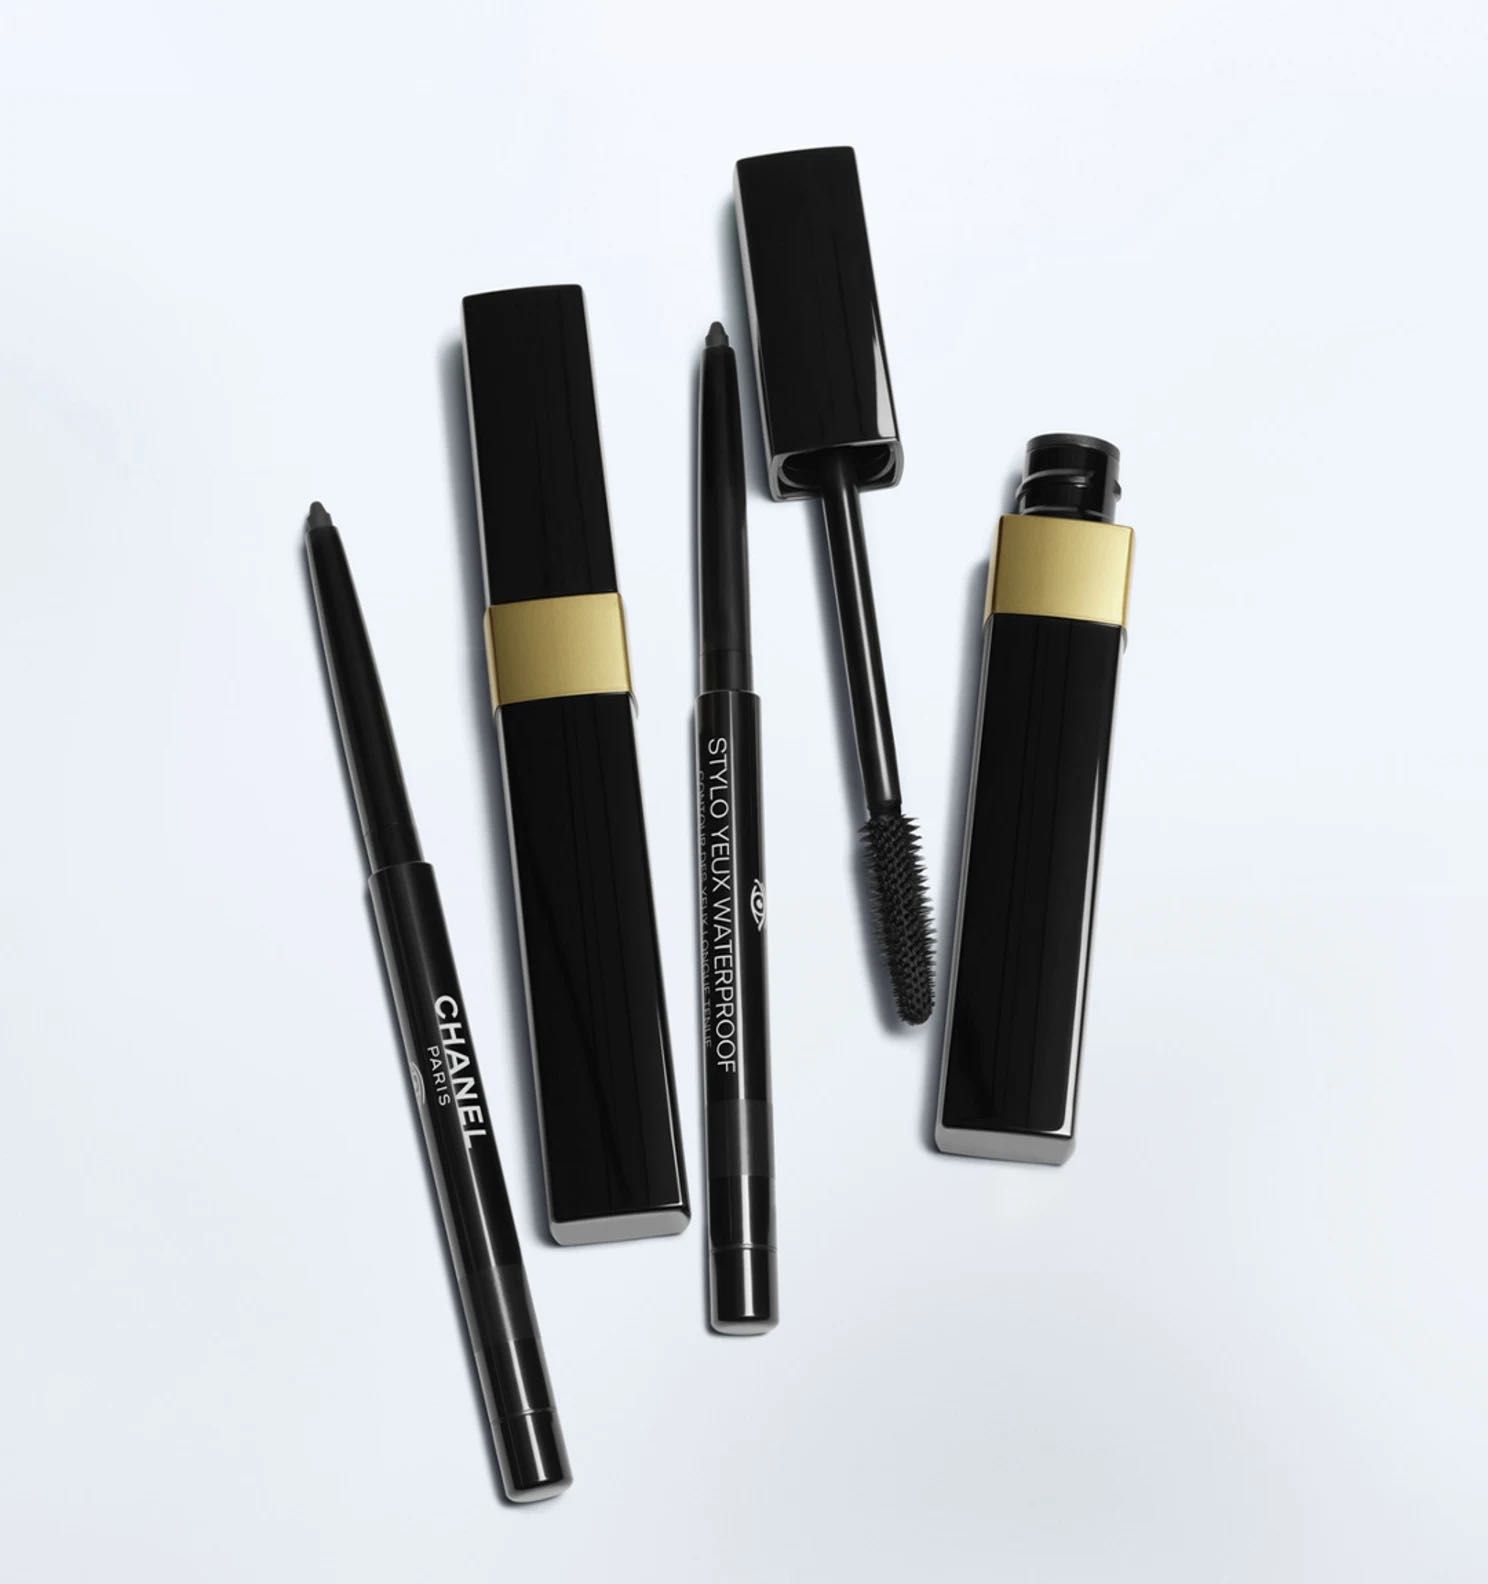 CHANEL Care, Face, on Carousell Makeup & MASCARA, INIMITABLE Beauty WATERPROOF Personal